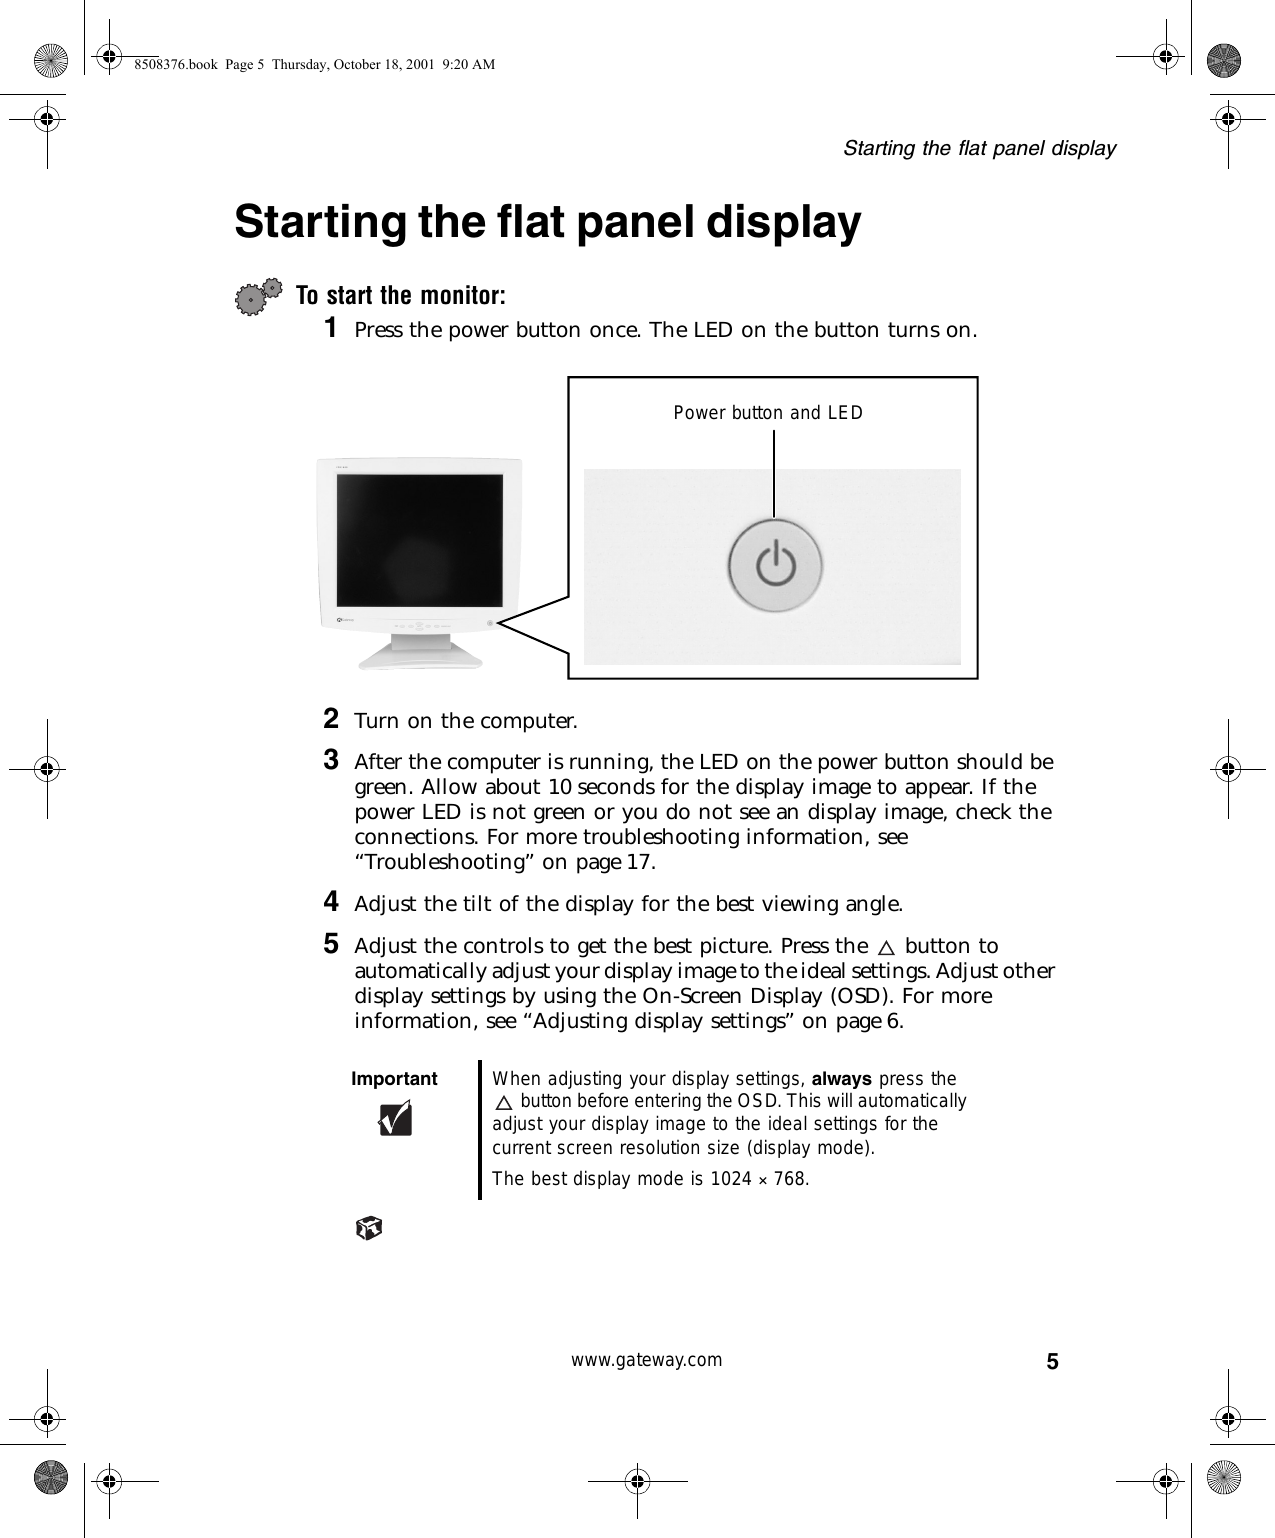 5Starting the flat panel displaywww.gateway.comStarting the flat panel displayTo start the monitor:1Press the power button once. The LED on the button turns on.2Turn on the computer.3After the computer is running, the LED on the power button should be green. Allow about 10 seconds for the display image to appear. If the power LED is not green or you do not see an display image, check the connections. For more troubleshooting information, see “Troubleshooting” on page 17.4Adjust the tilt of the display for the best viewing angle.5Adjust the controls to get the best picture. Press the   button to automatically adjust your display image to the ideal settings. Adjust other display settings by using the On-Screen Display (OSD). For more information, see “Adjusting display settings” on page 6.Important When adjusting your display settings, always press the button before entering the OSD. This will automatically adjust your display image to the ideal settings for the current screen resolution size (display mode).The best display mode is 1024 ×768.Power button and LED8508376.book  Page 5  Thursday, October 18, 2001  9:20 AM